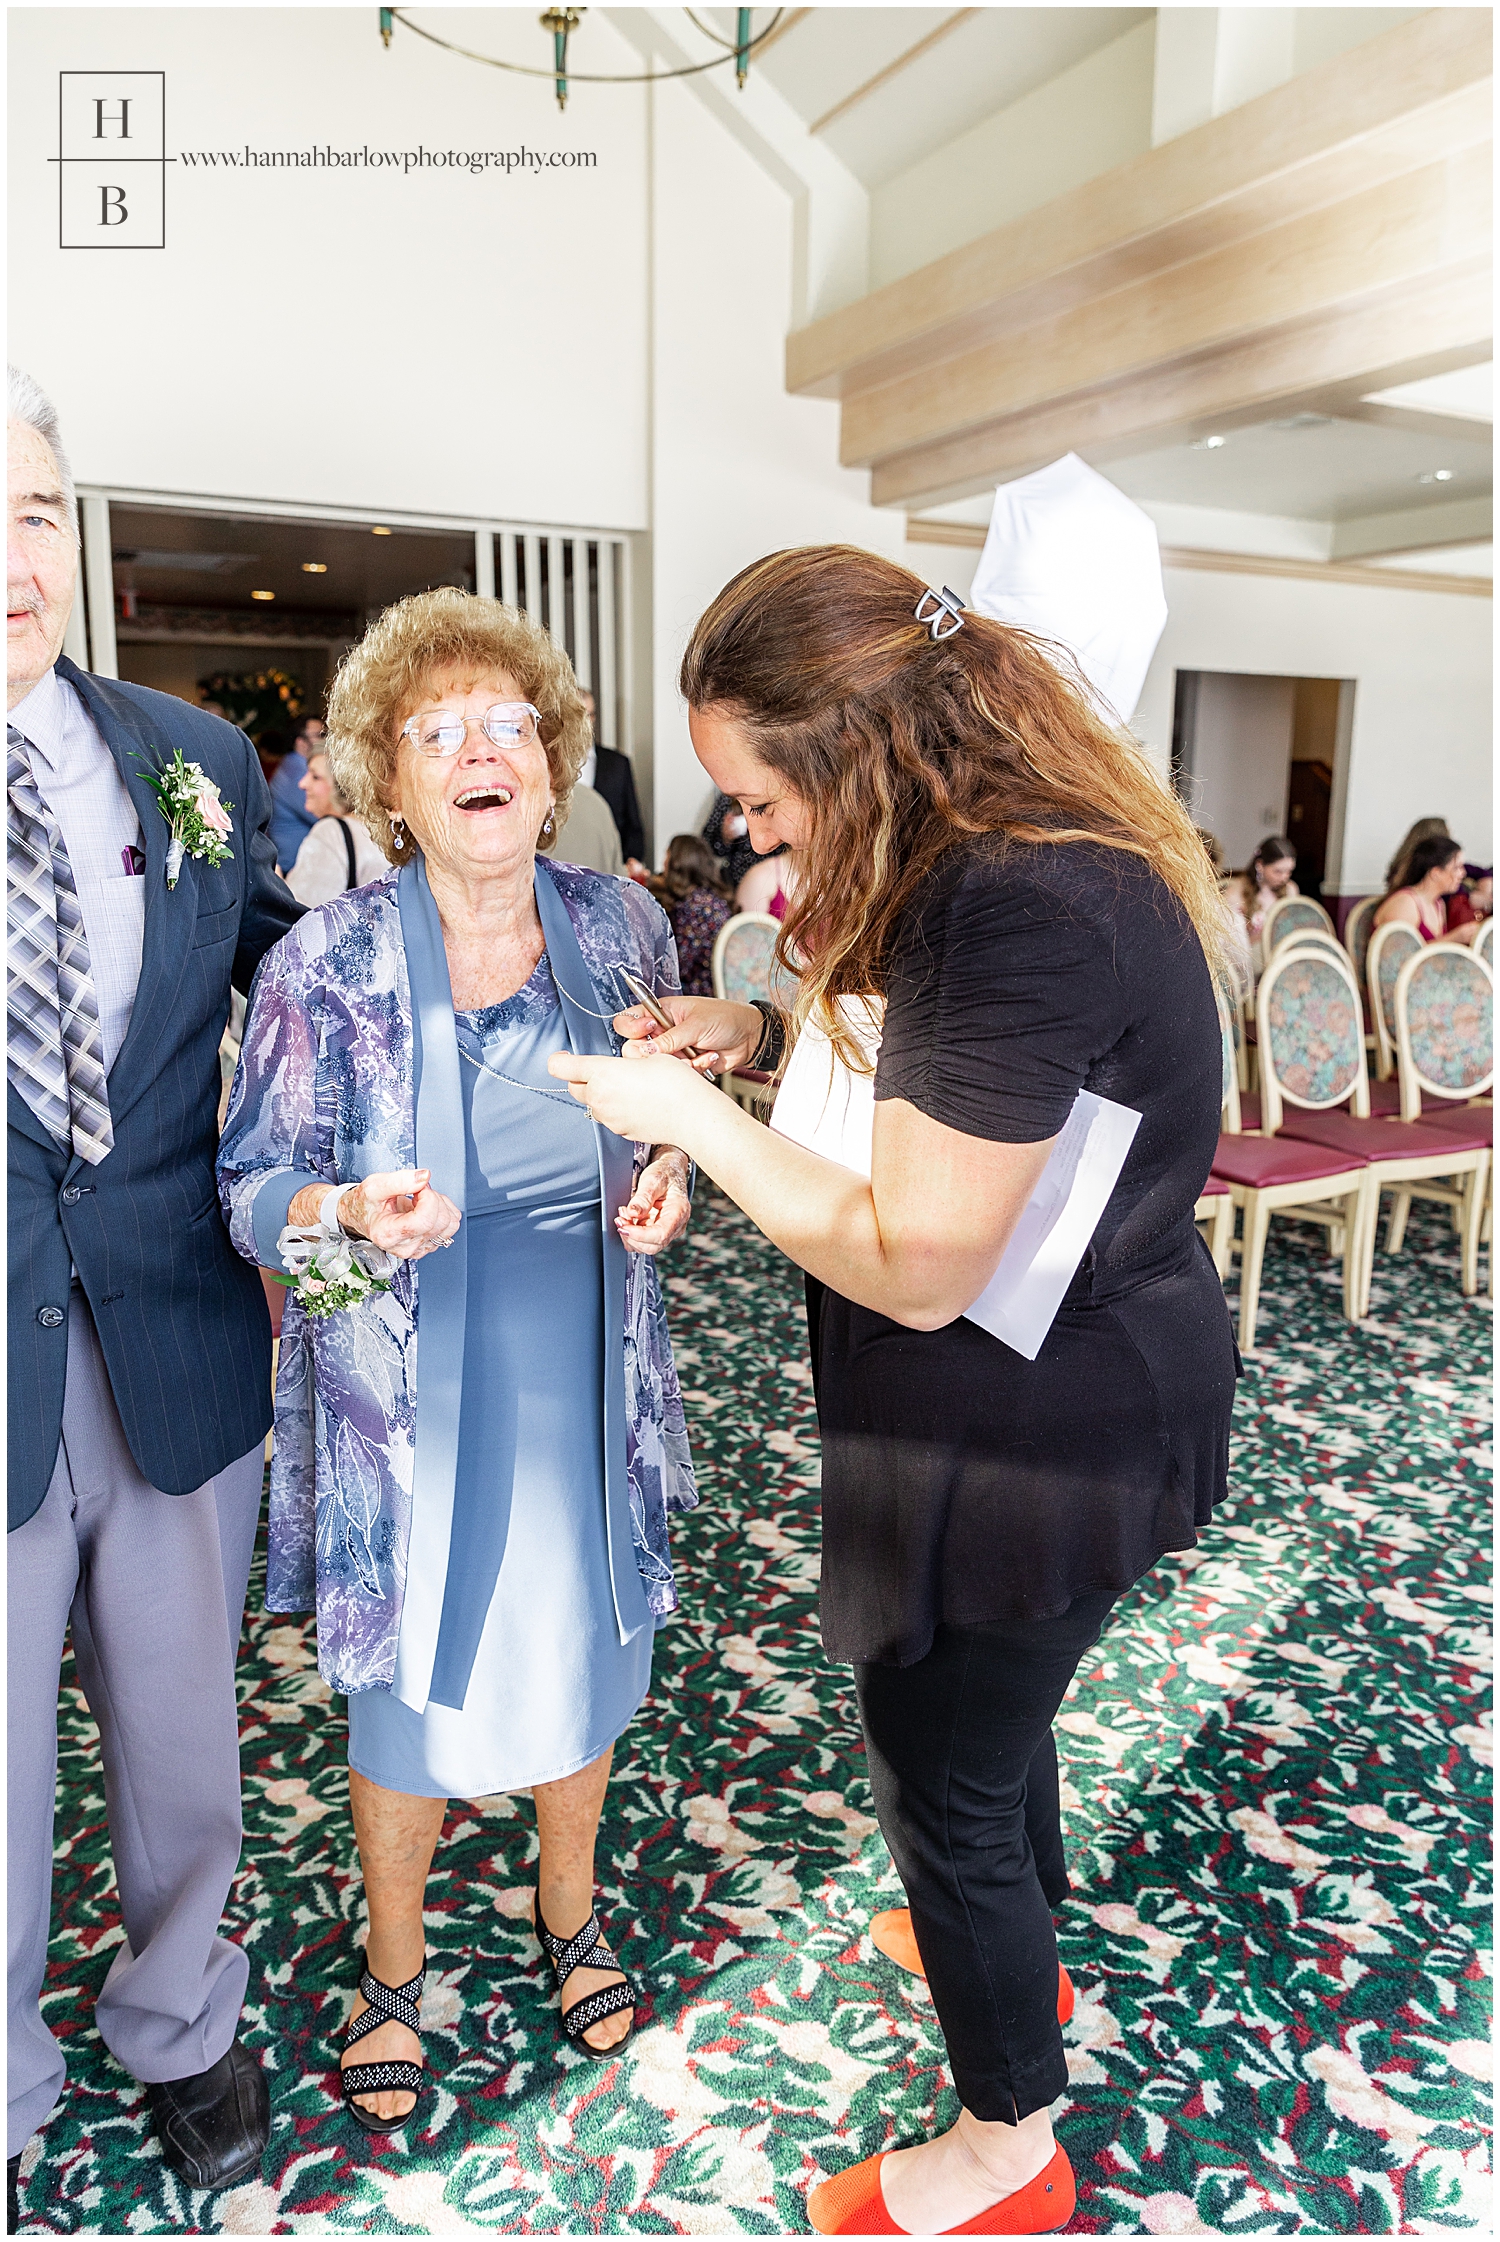 Wedding photographer helps laughing grandmother fix necklace